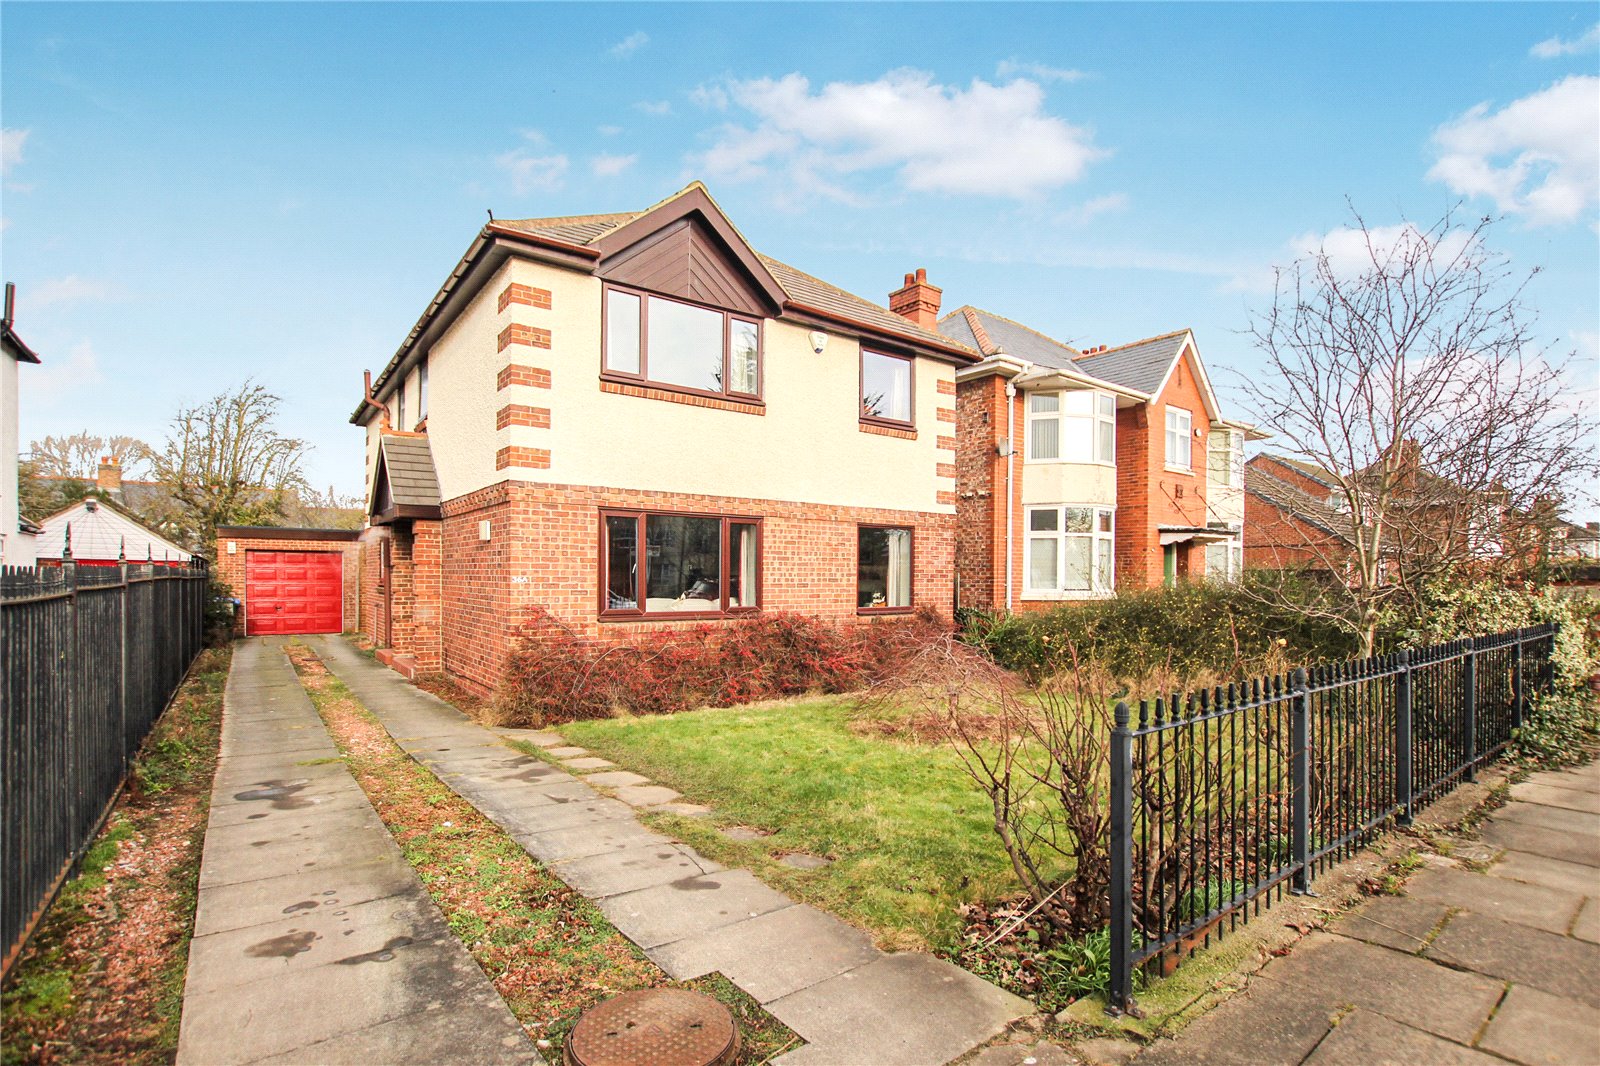 4 bed house for sale in Harrow Road, Linthorpe 1